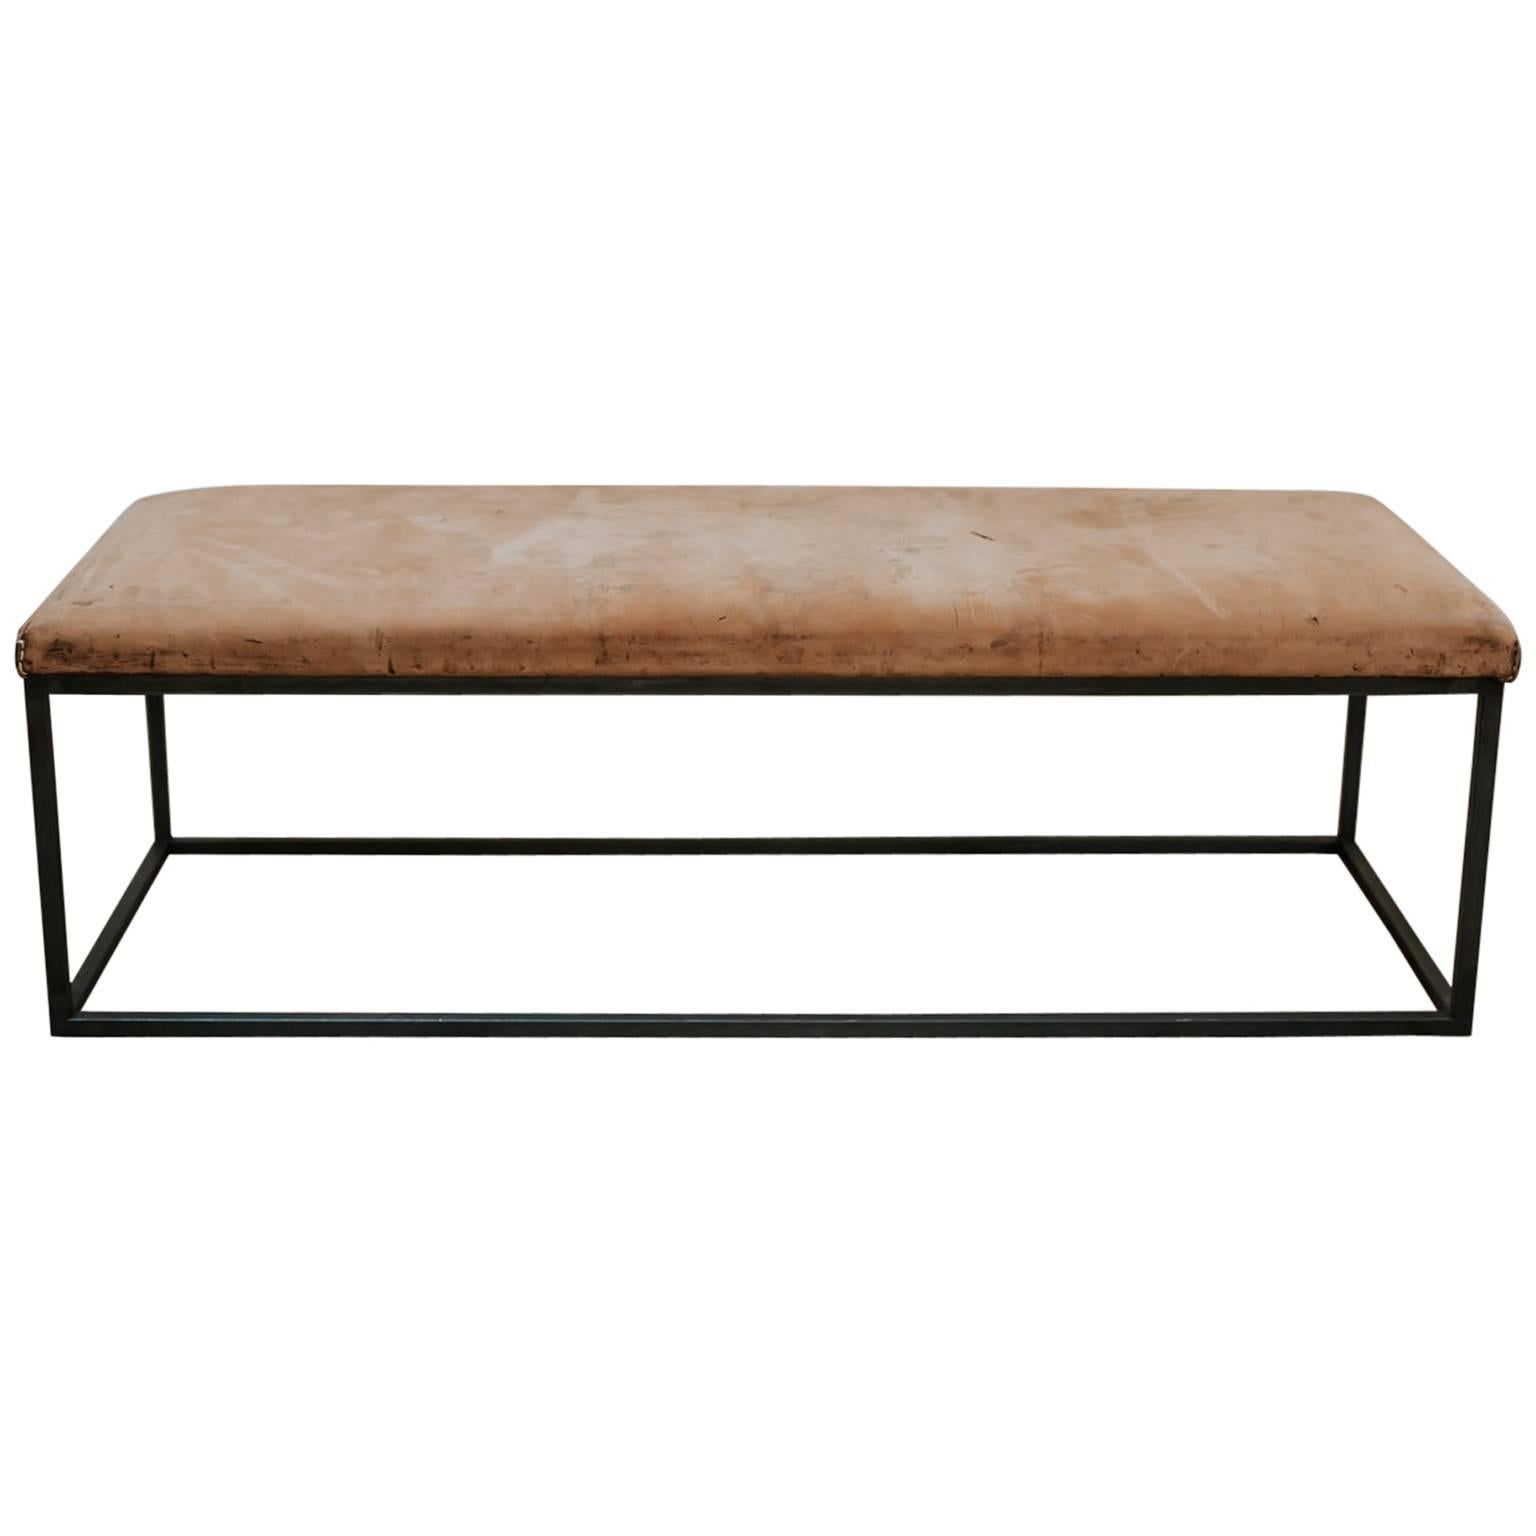 Customized Coffee Table or Bedend, Old Leather Top on Contemporary Iron Base